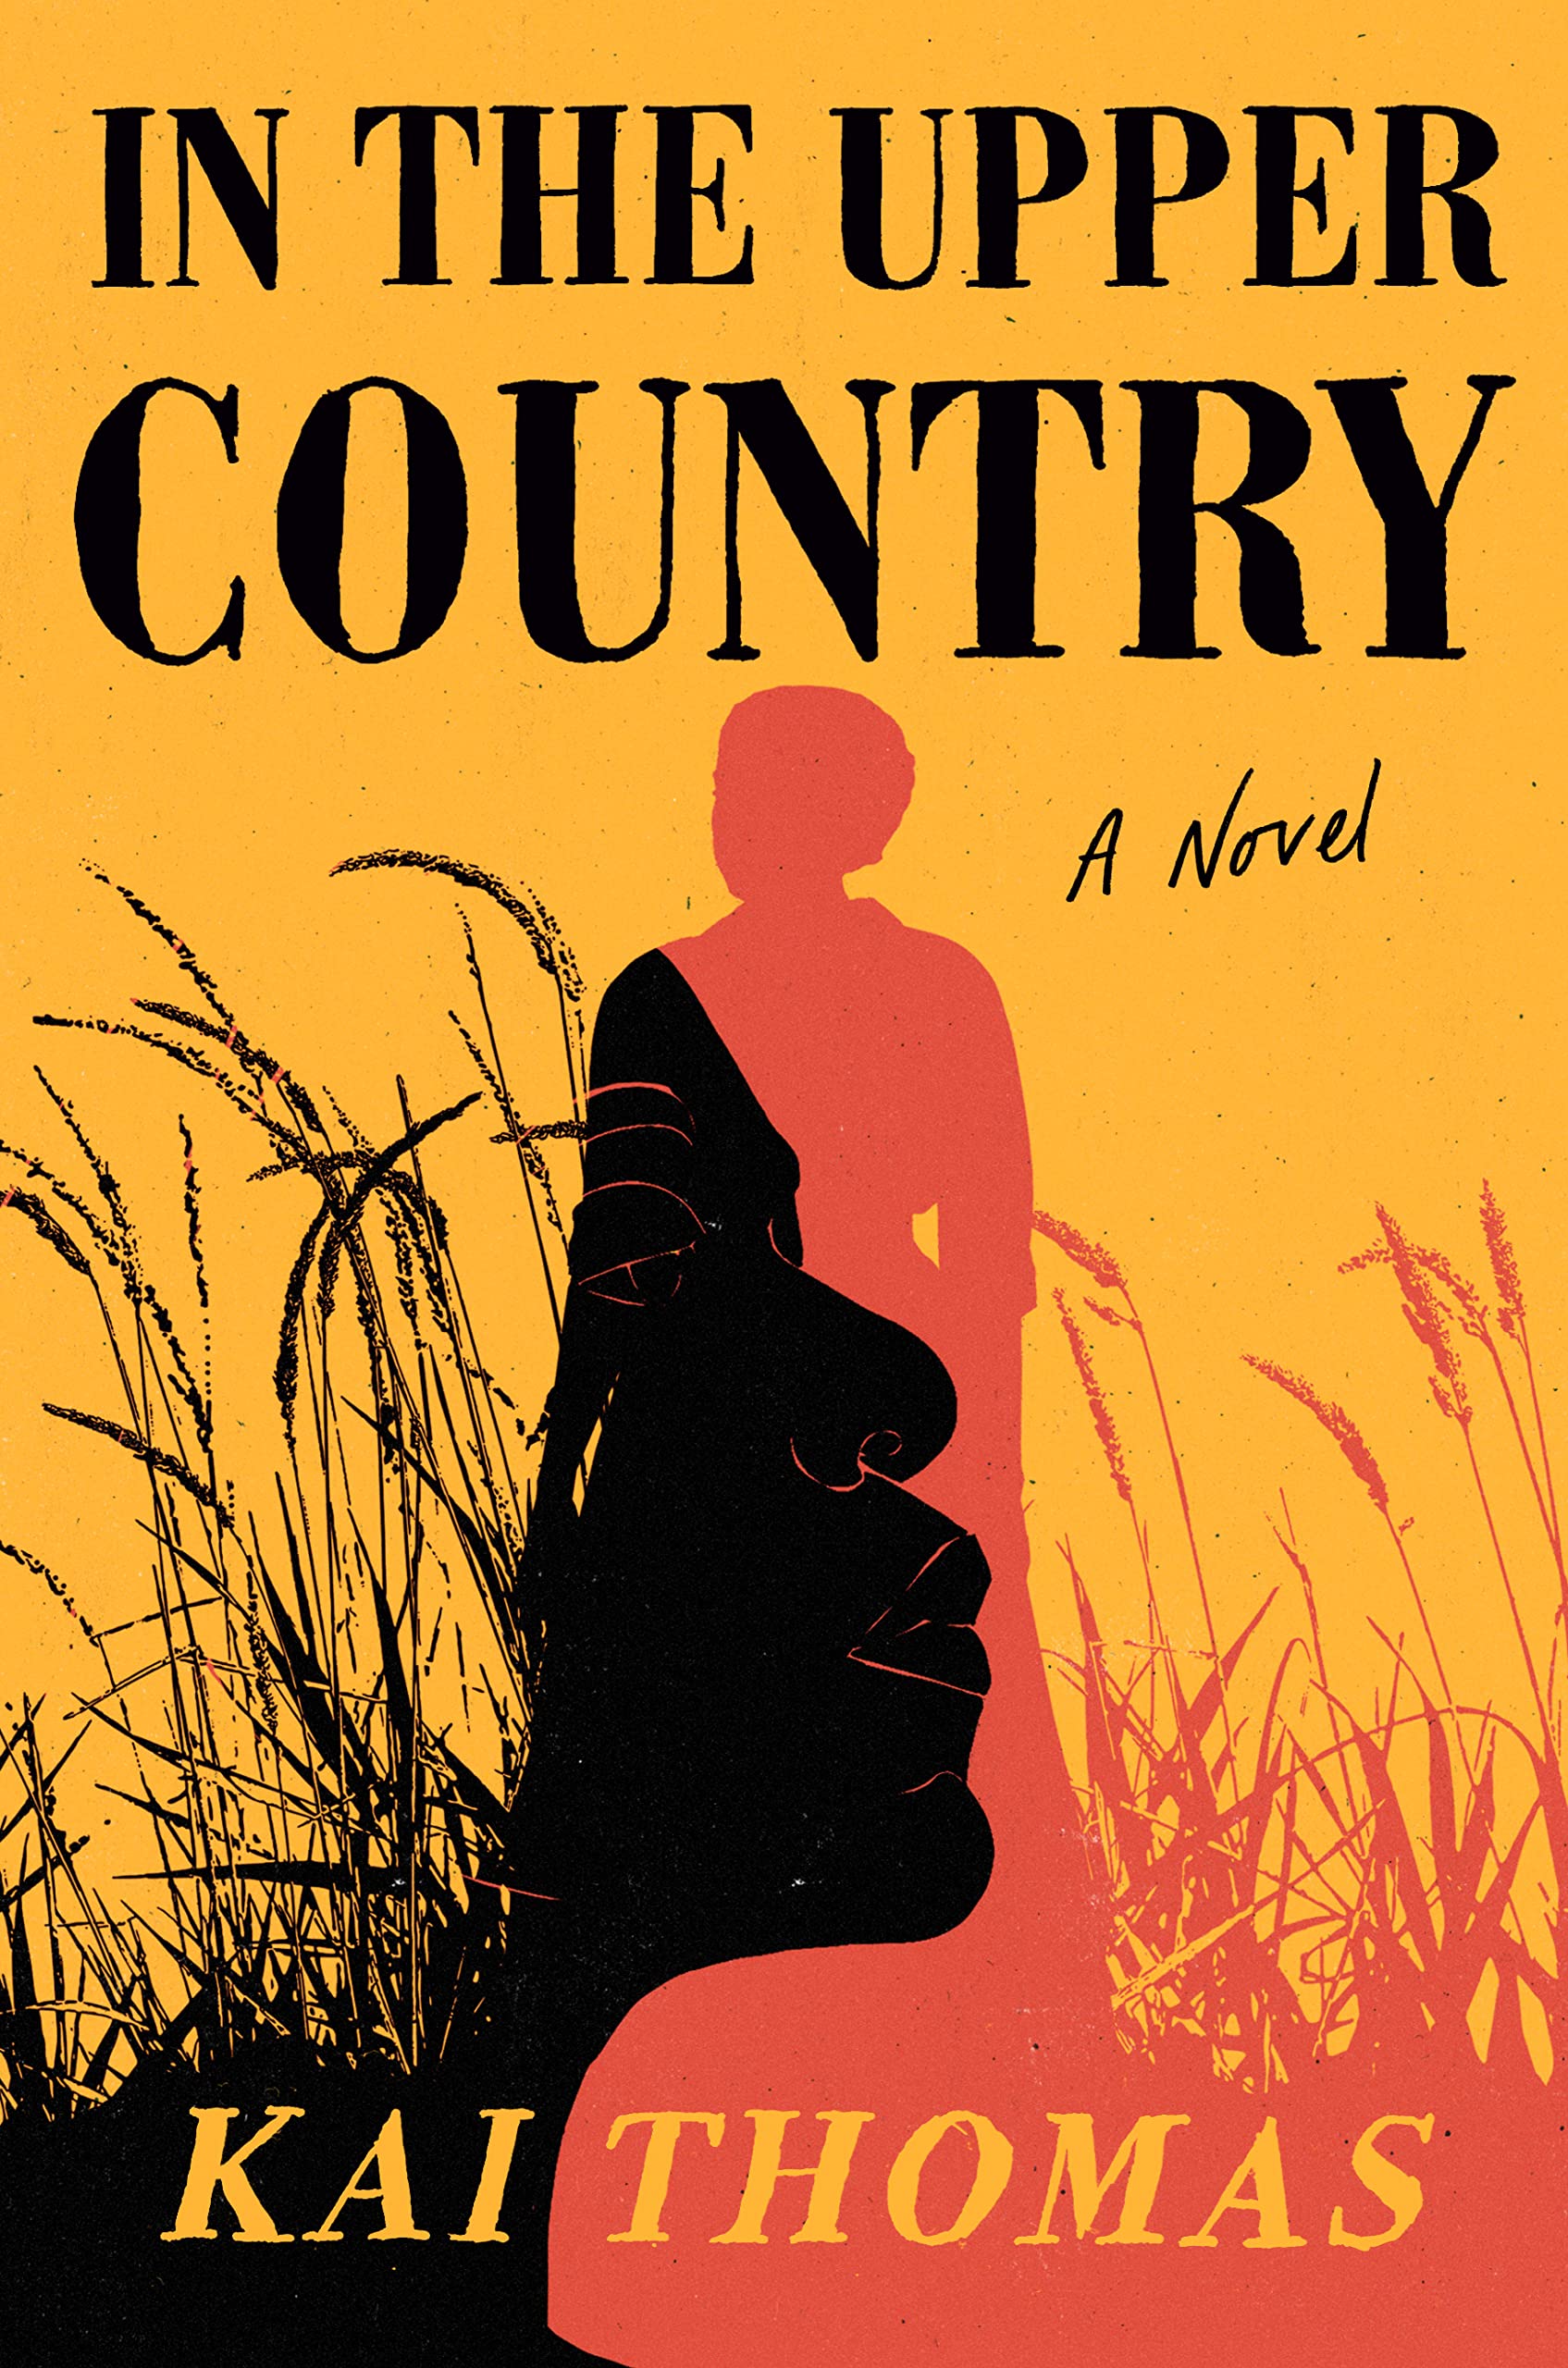 Image for "In the Upper Country"